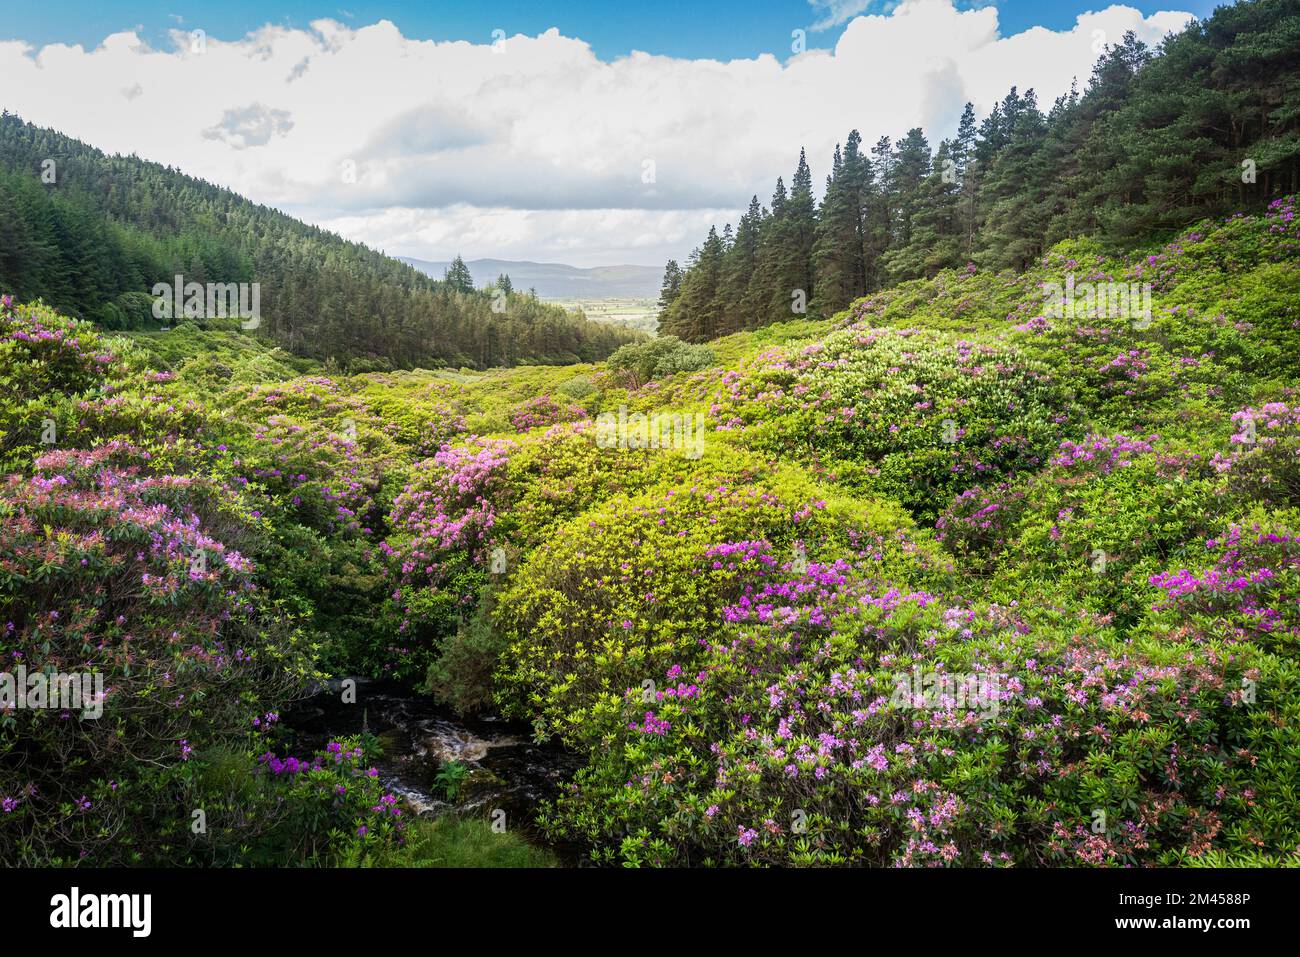 Scenic green valley and colourful rhododendron bushes in the Vee, Knockmealdown Mountains, Ireland. Stock Photo